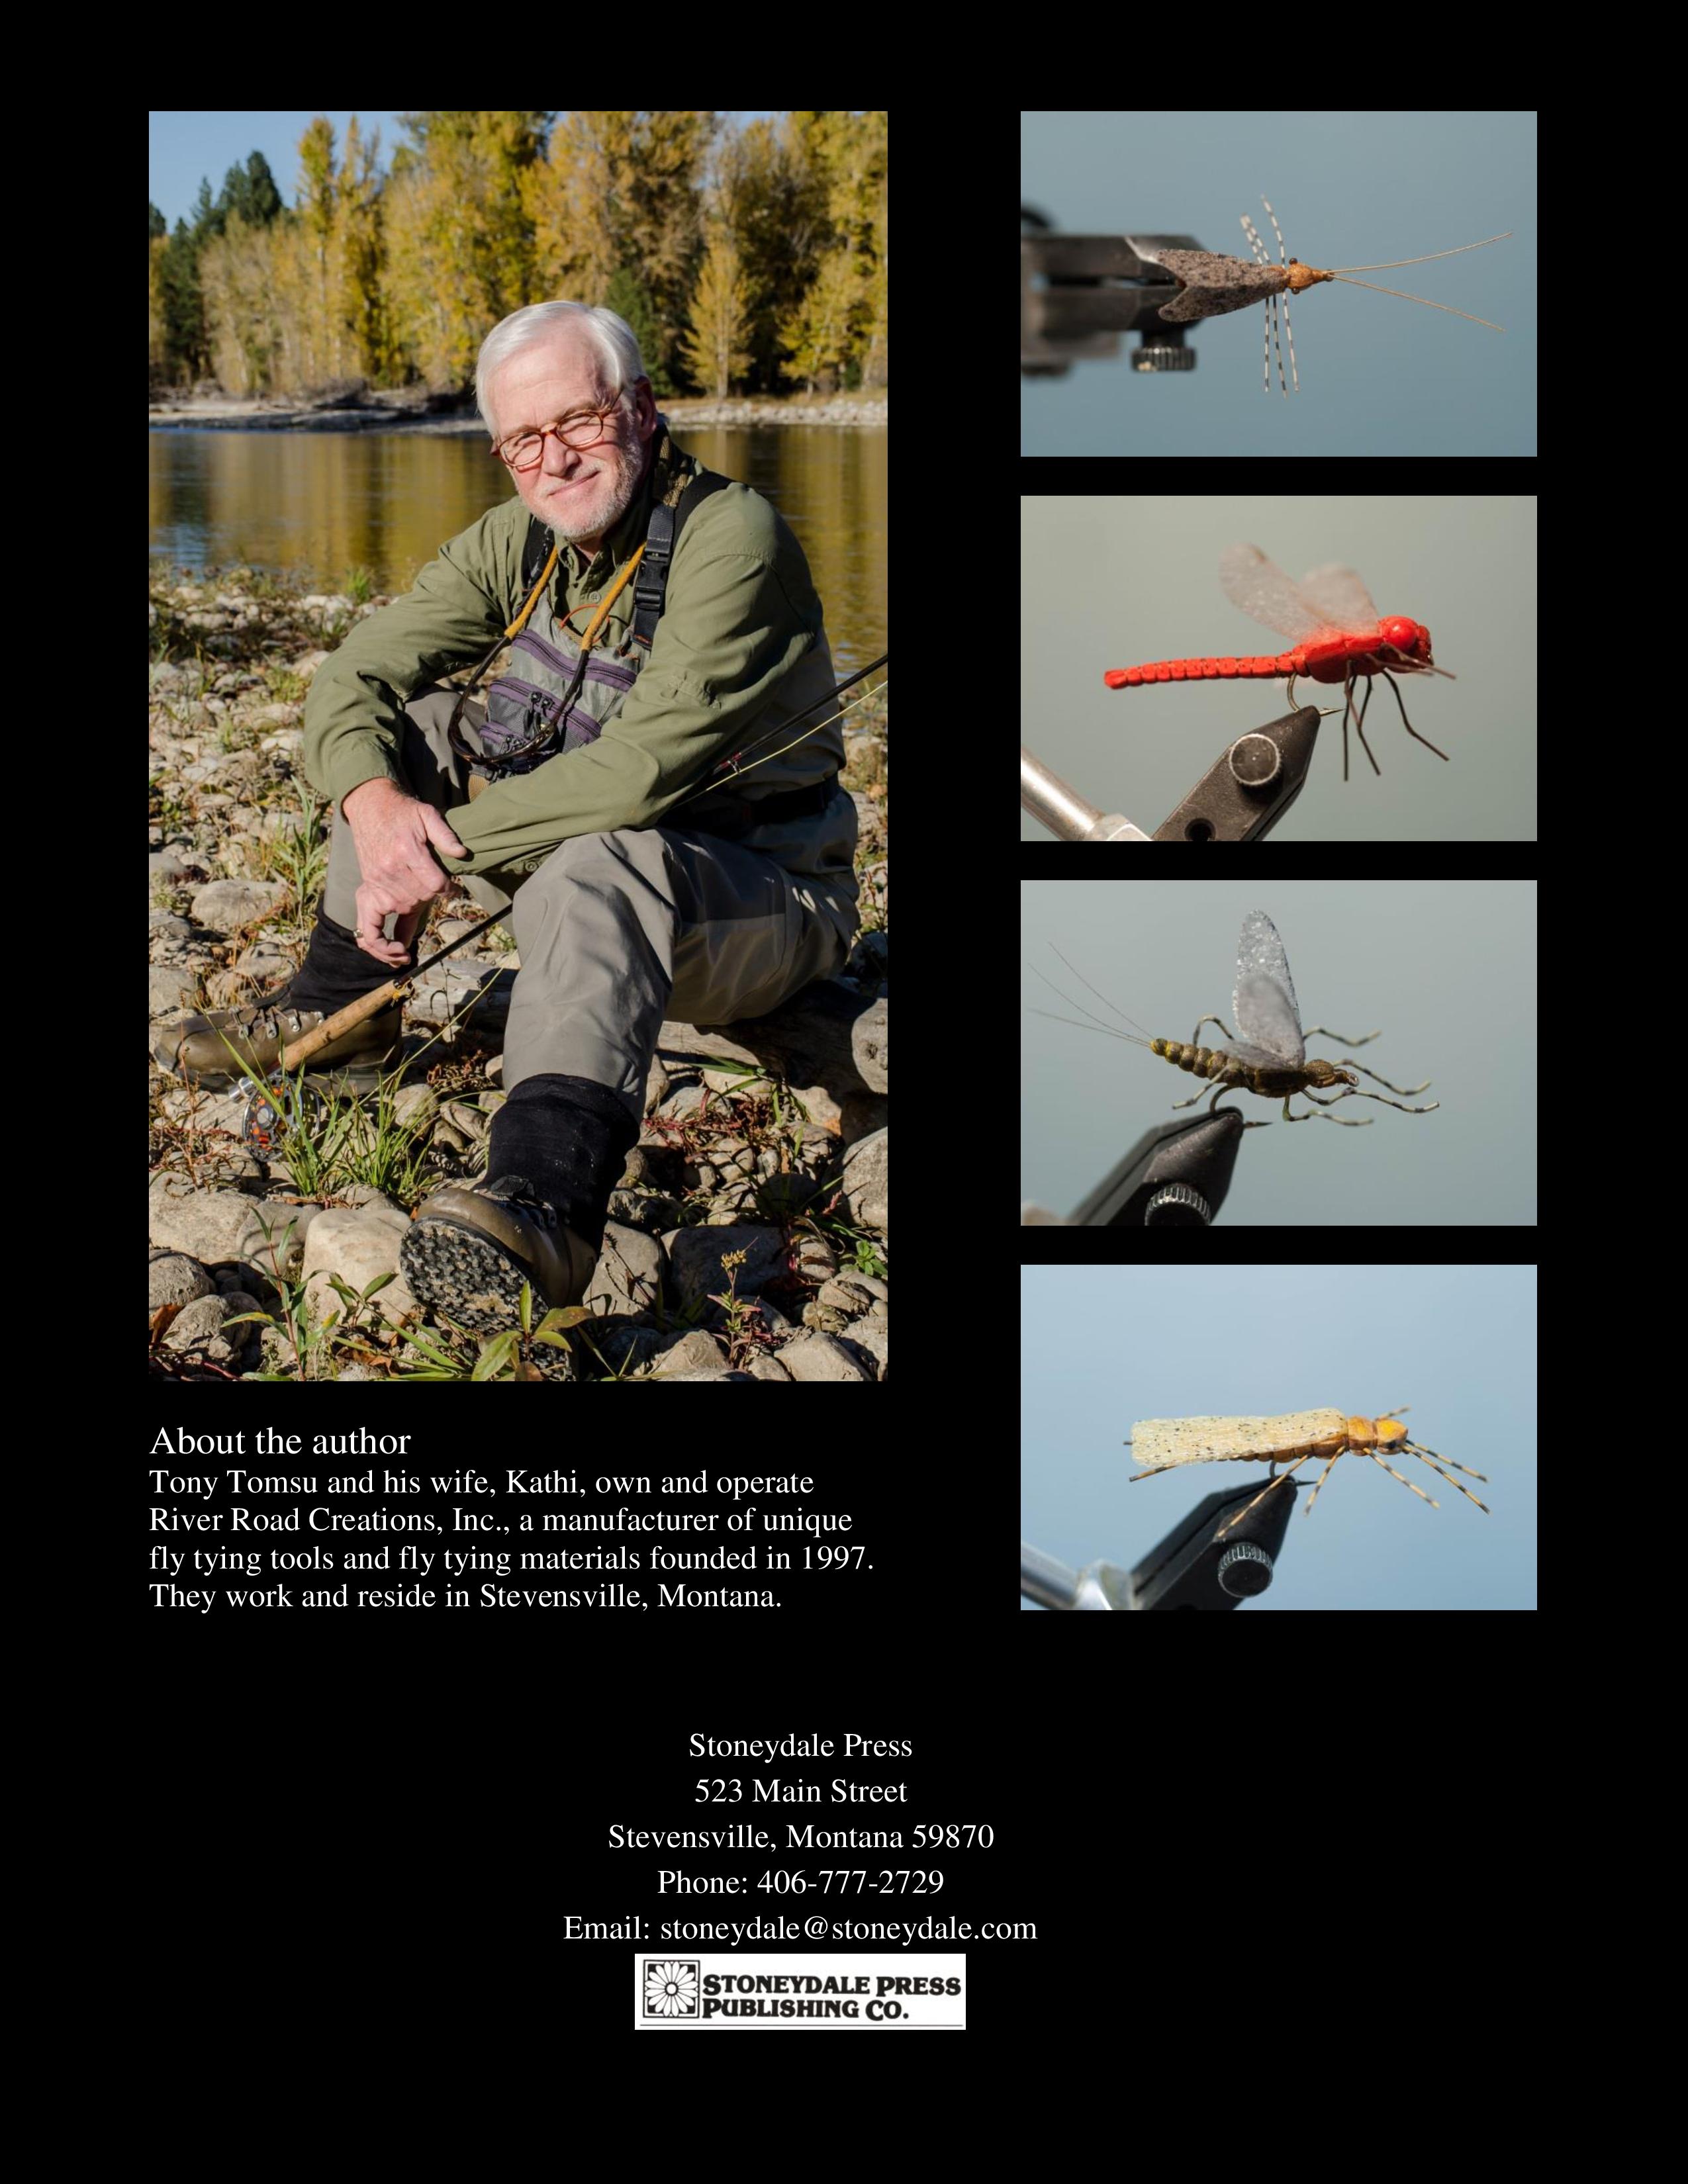 World-renowned fly tyer Tony Tomsu shares his secrets in new book